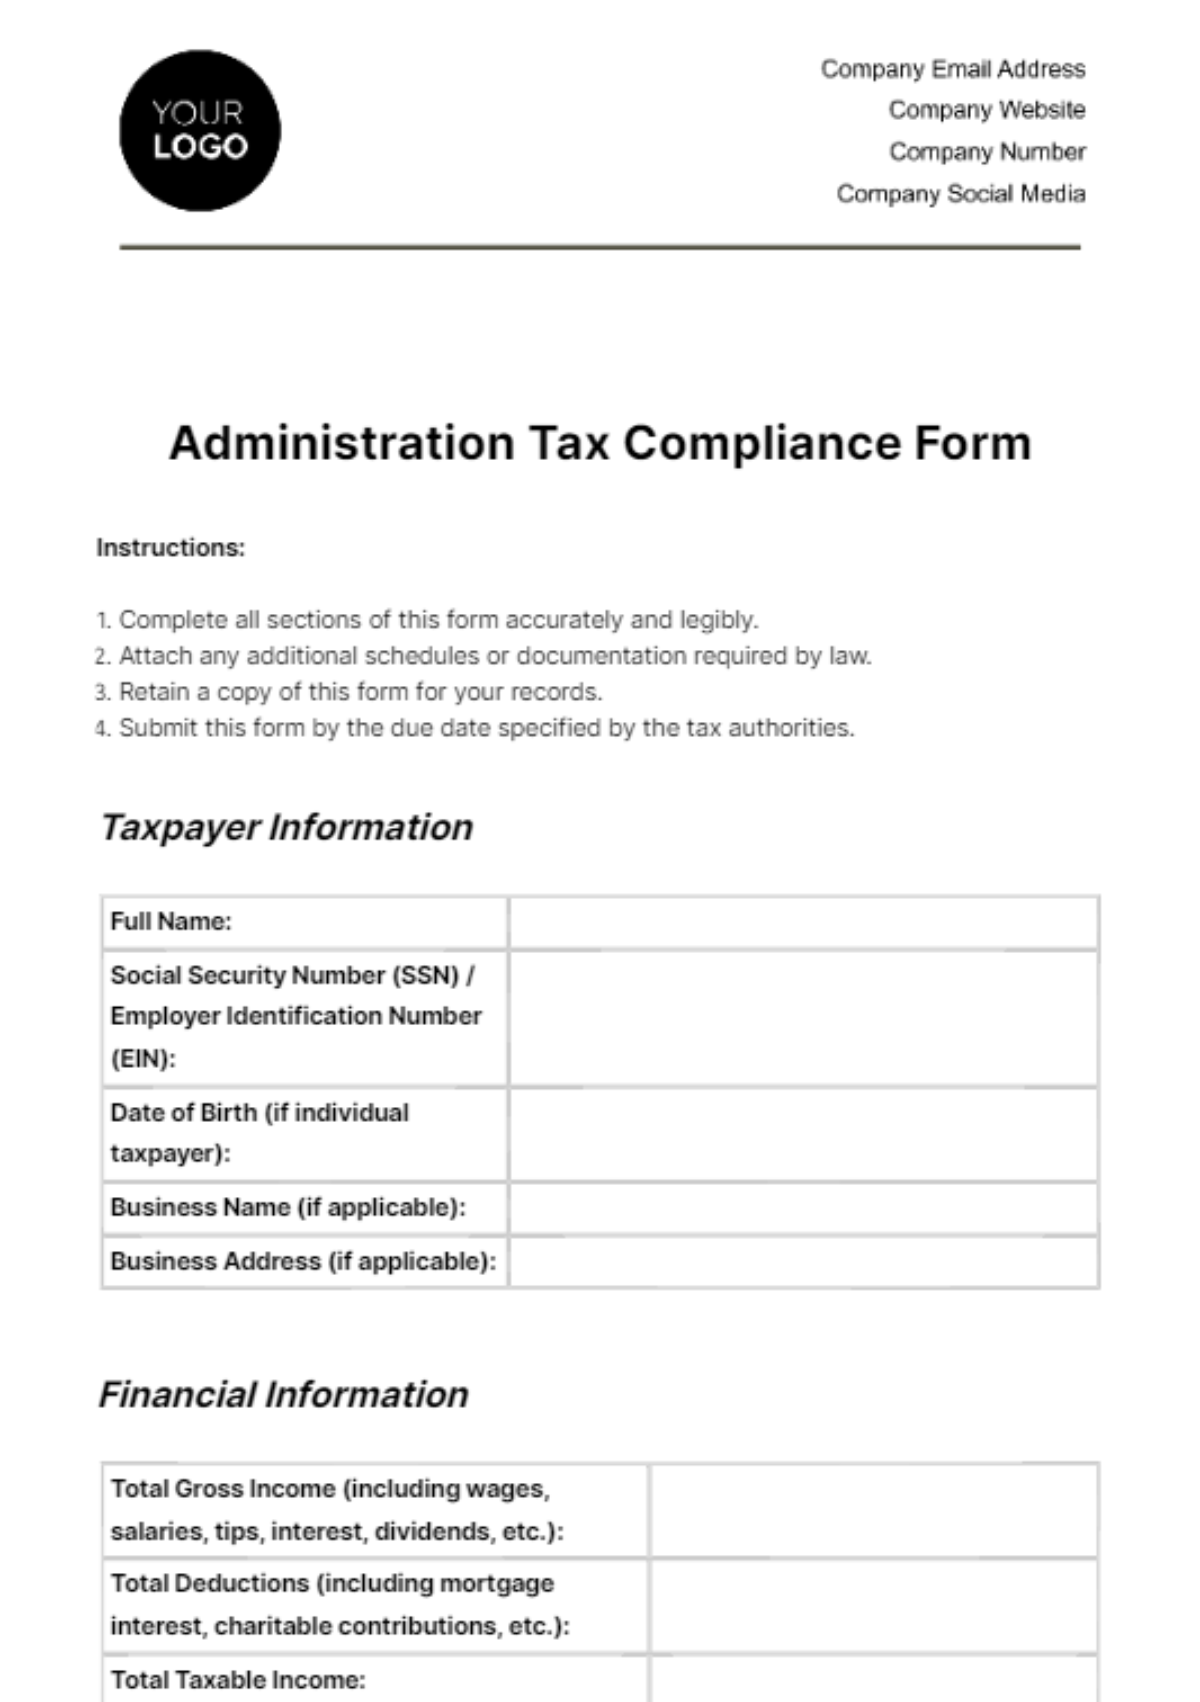 Free Administration Tax Compliance Form Template